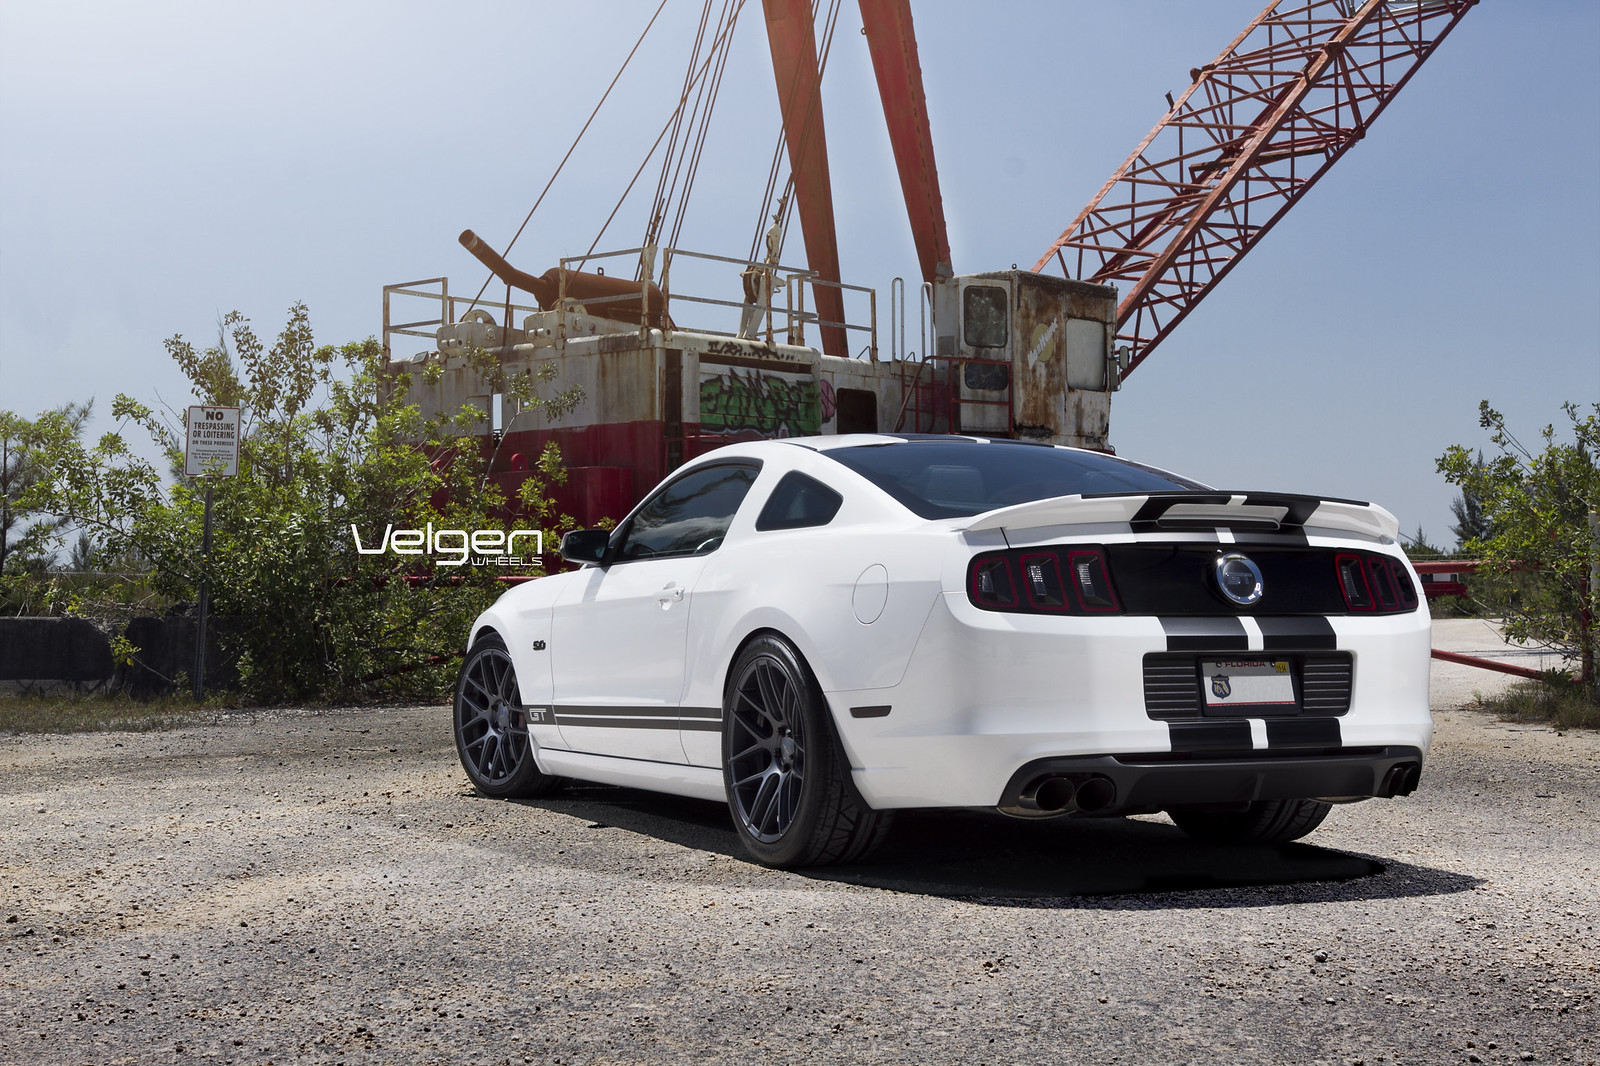 One of the girls streets white mustang. Mustang gt 5.0. Oz Wheels Ford Mustang.